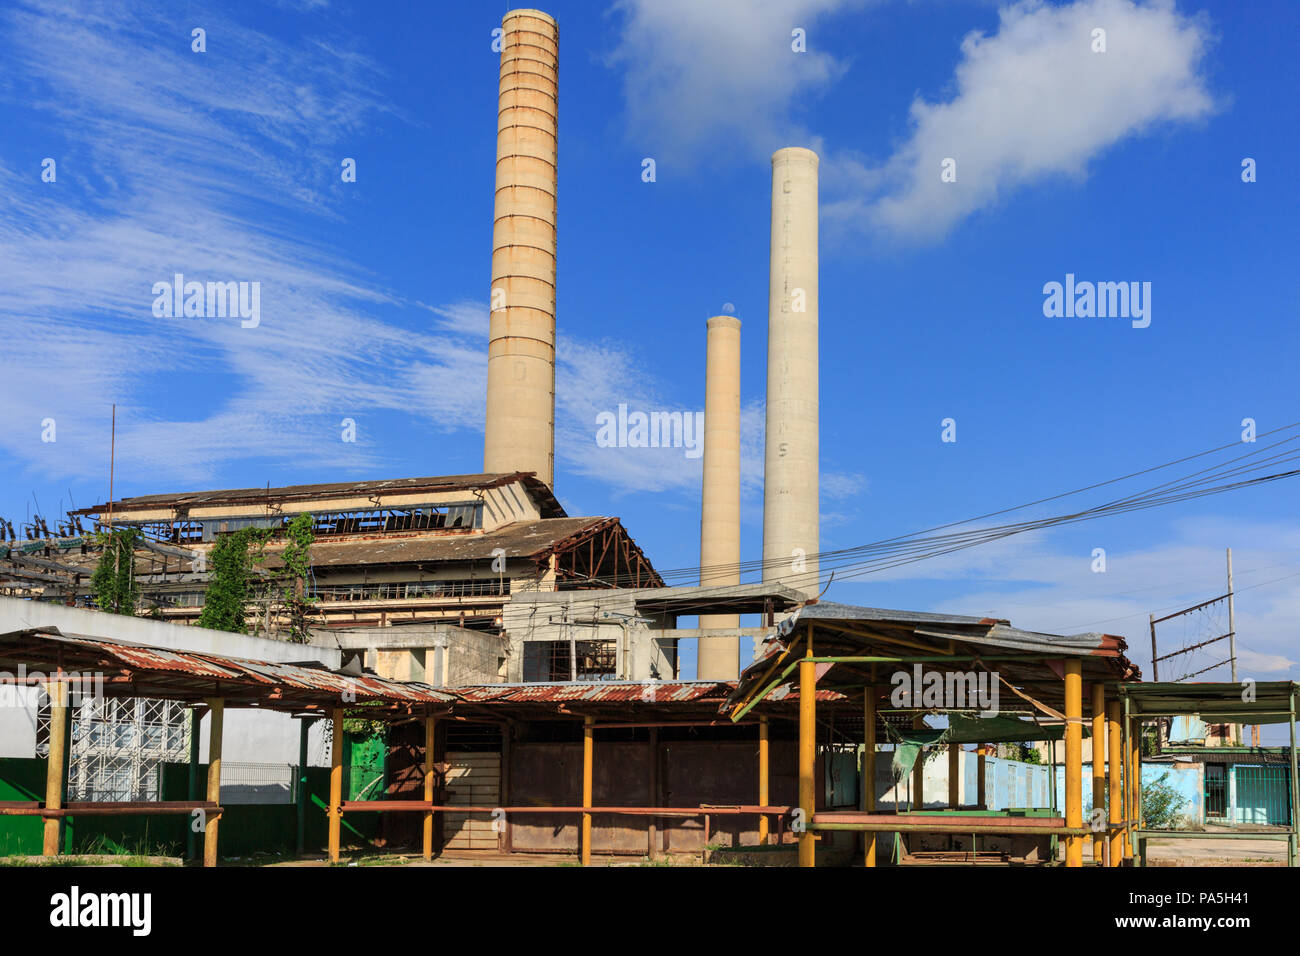 Dilapidated formerHershey Sugar Mill and refinery, built for Hershey Chocolate production, model town of Hershey, now called Camilo Cienfuegos, Cuba Stock Photo